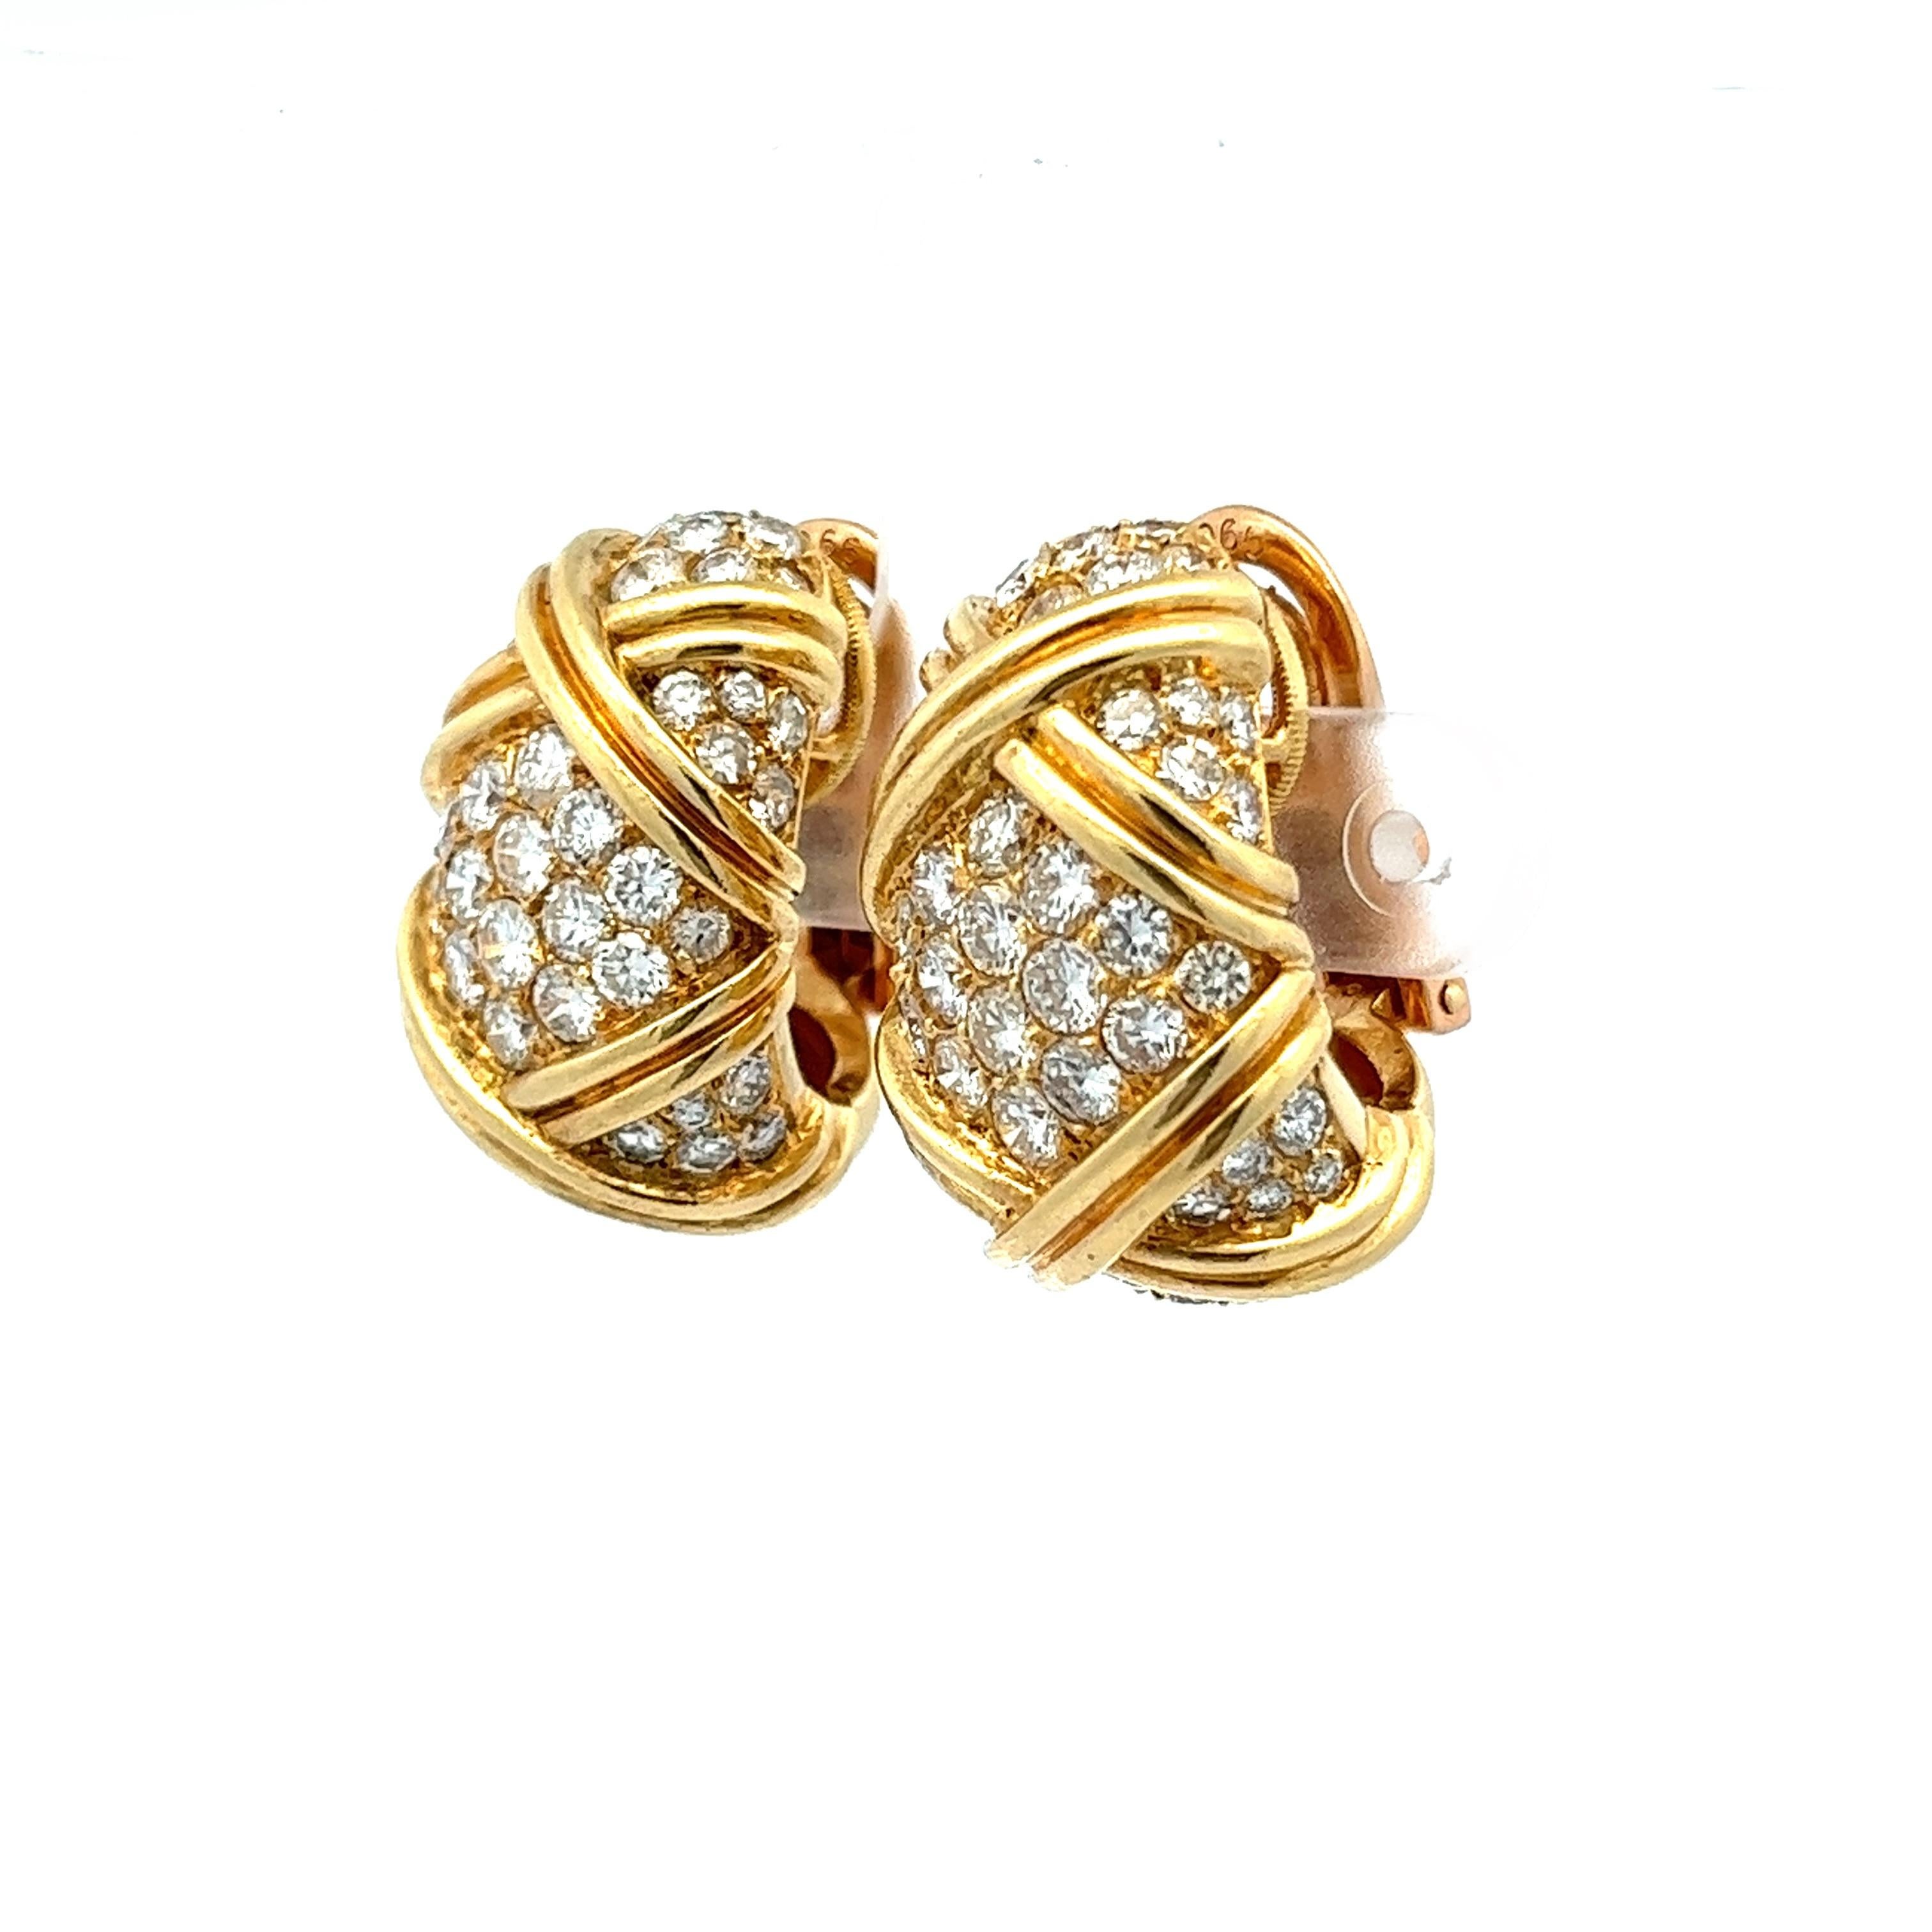 Exhibiting a blend of luxury and craftsmanship, these French-made 18 karat yellow gold clip-on earrings are sure to make statement. 

The half-hoop huggies house an impressive assembly of 106 VS F-G diamonds, with a collective weight of 6.18 carats.